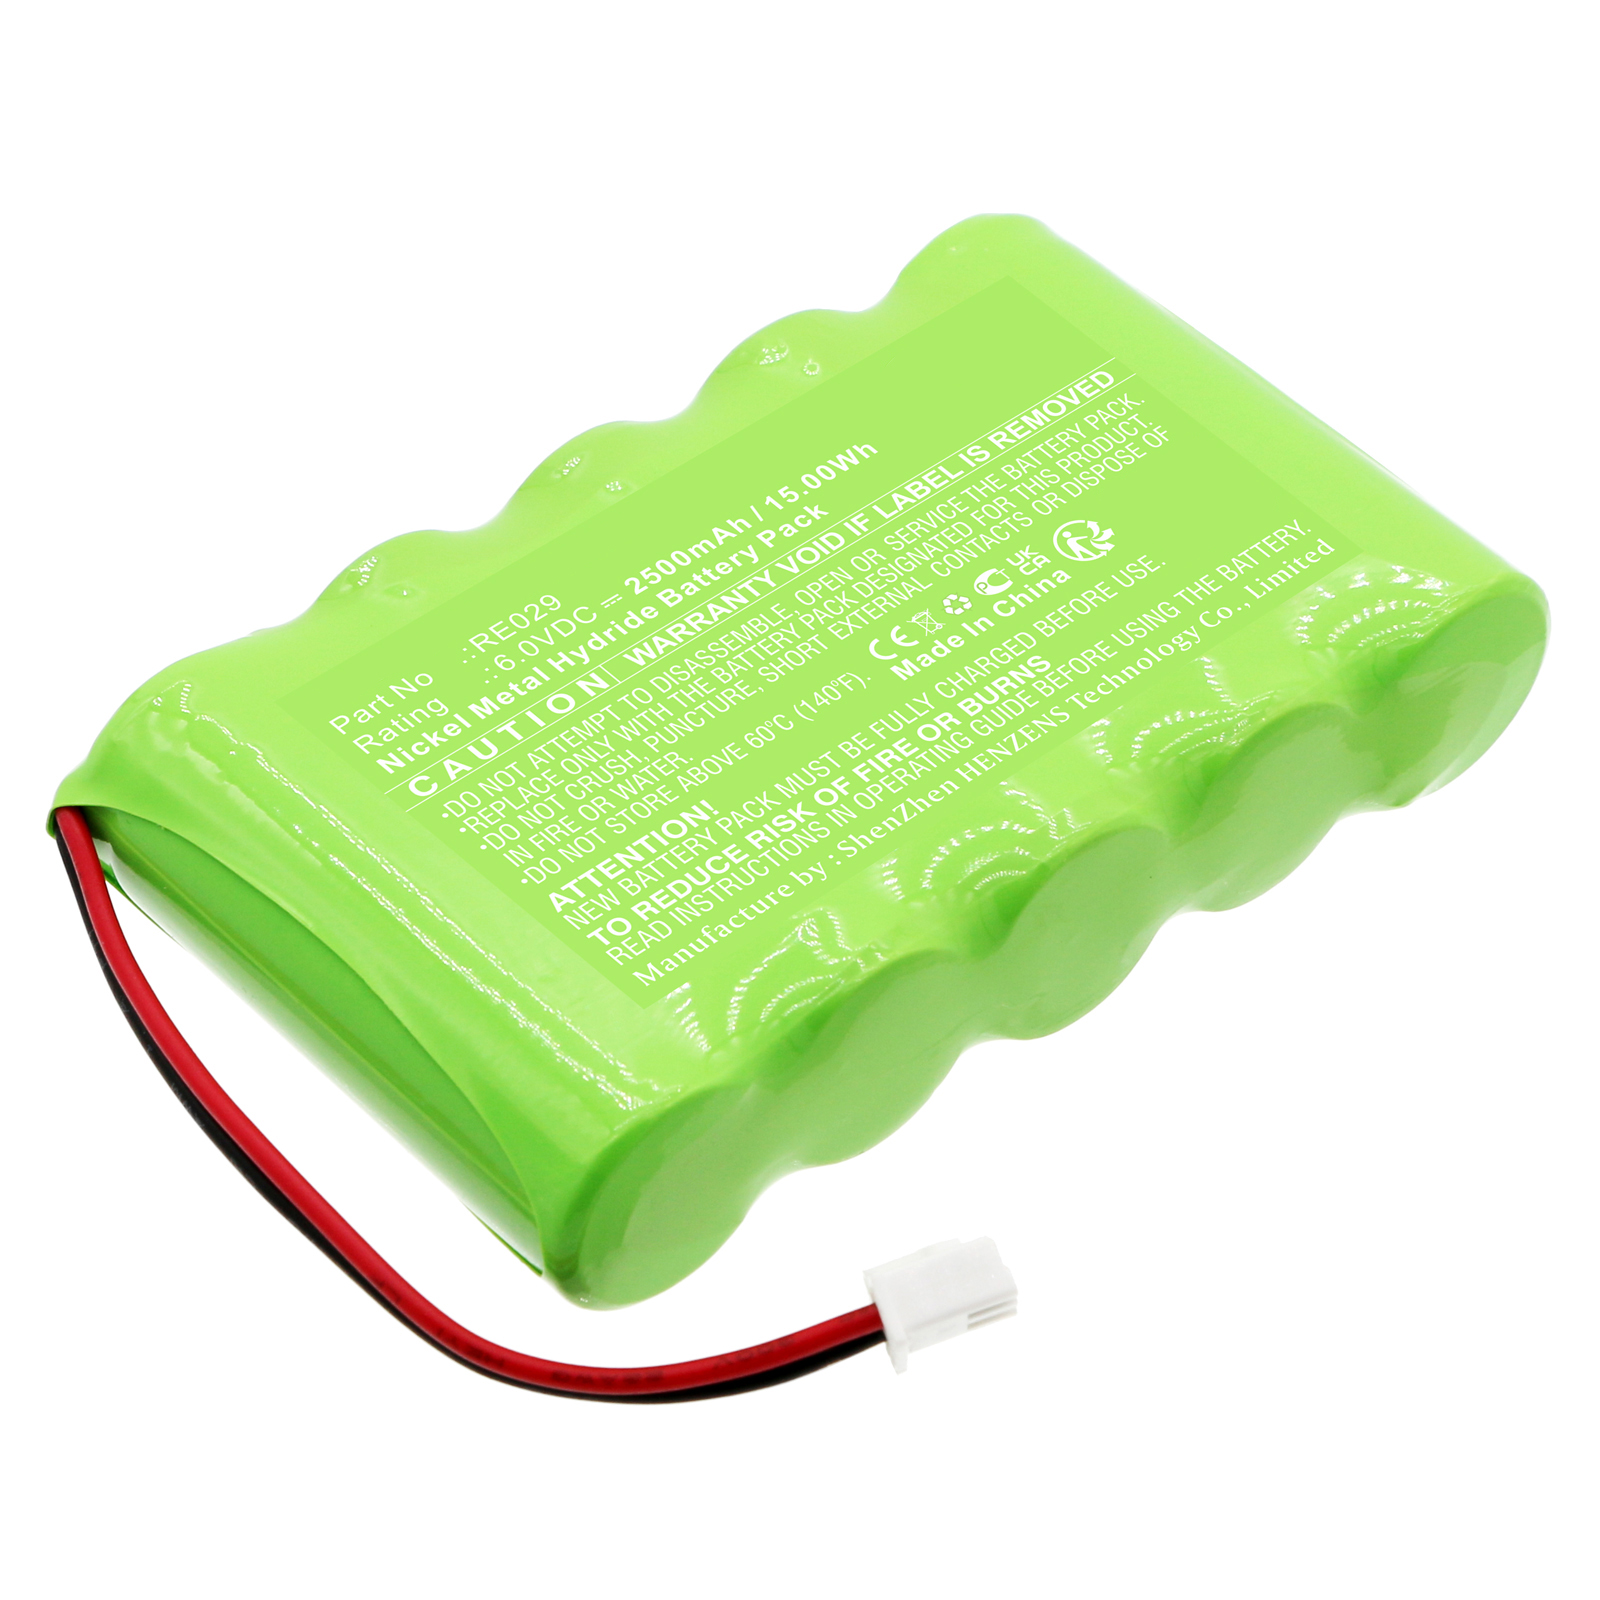 Synergy Digital Alarm System Battery, Compatible with Alula RE029 Alarm System Battery (Ni-MH, 6V, 2500mAh)